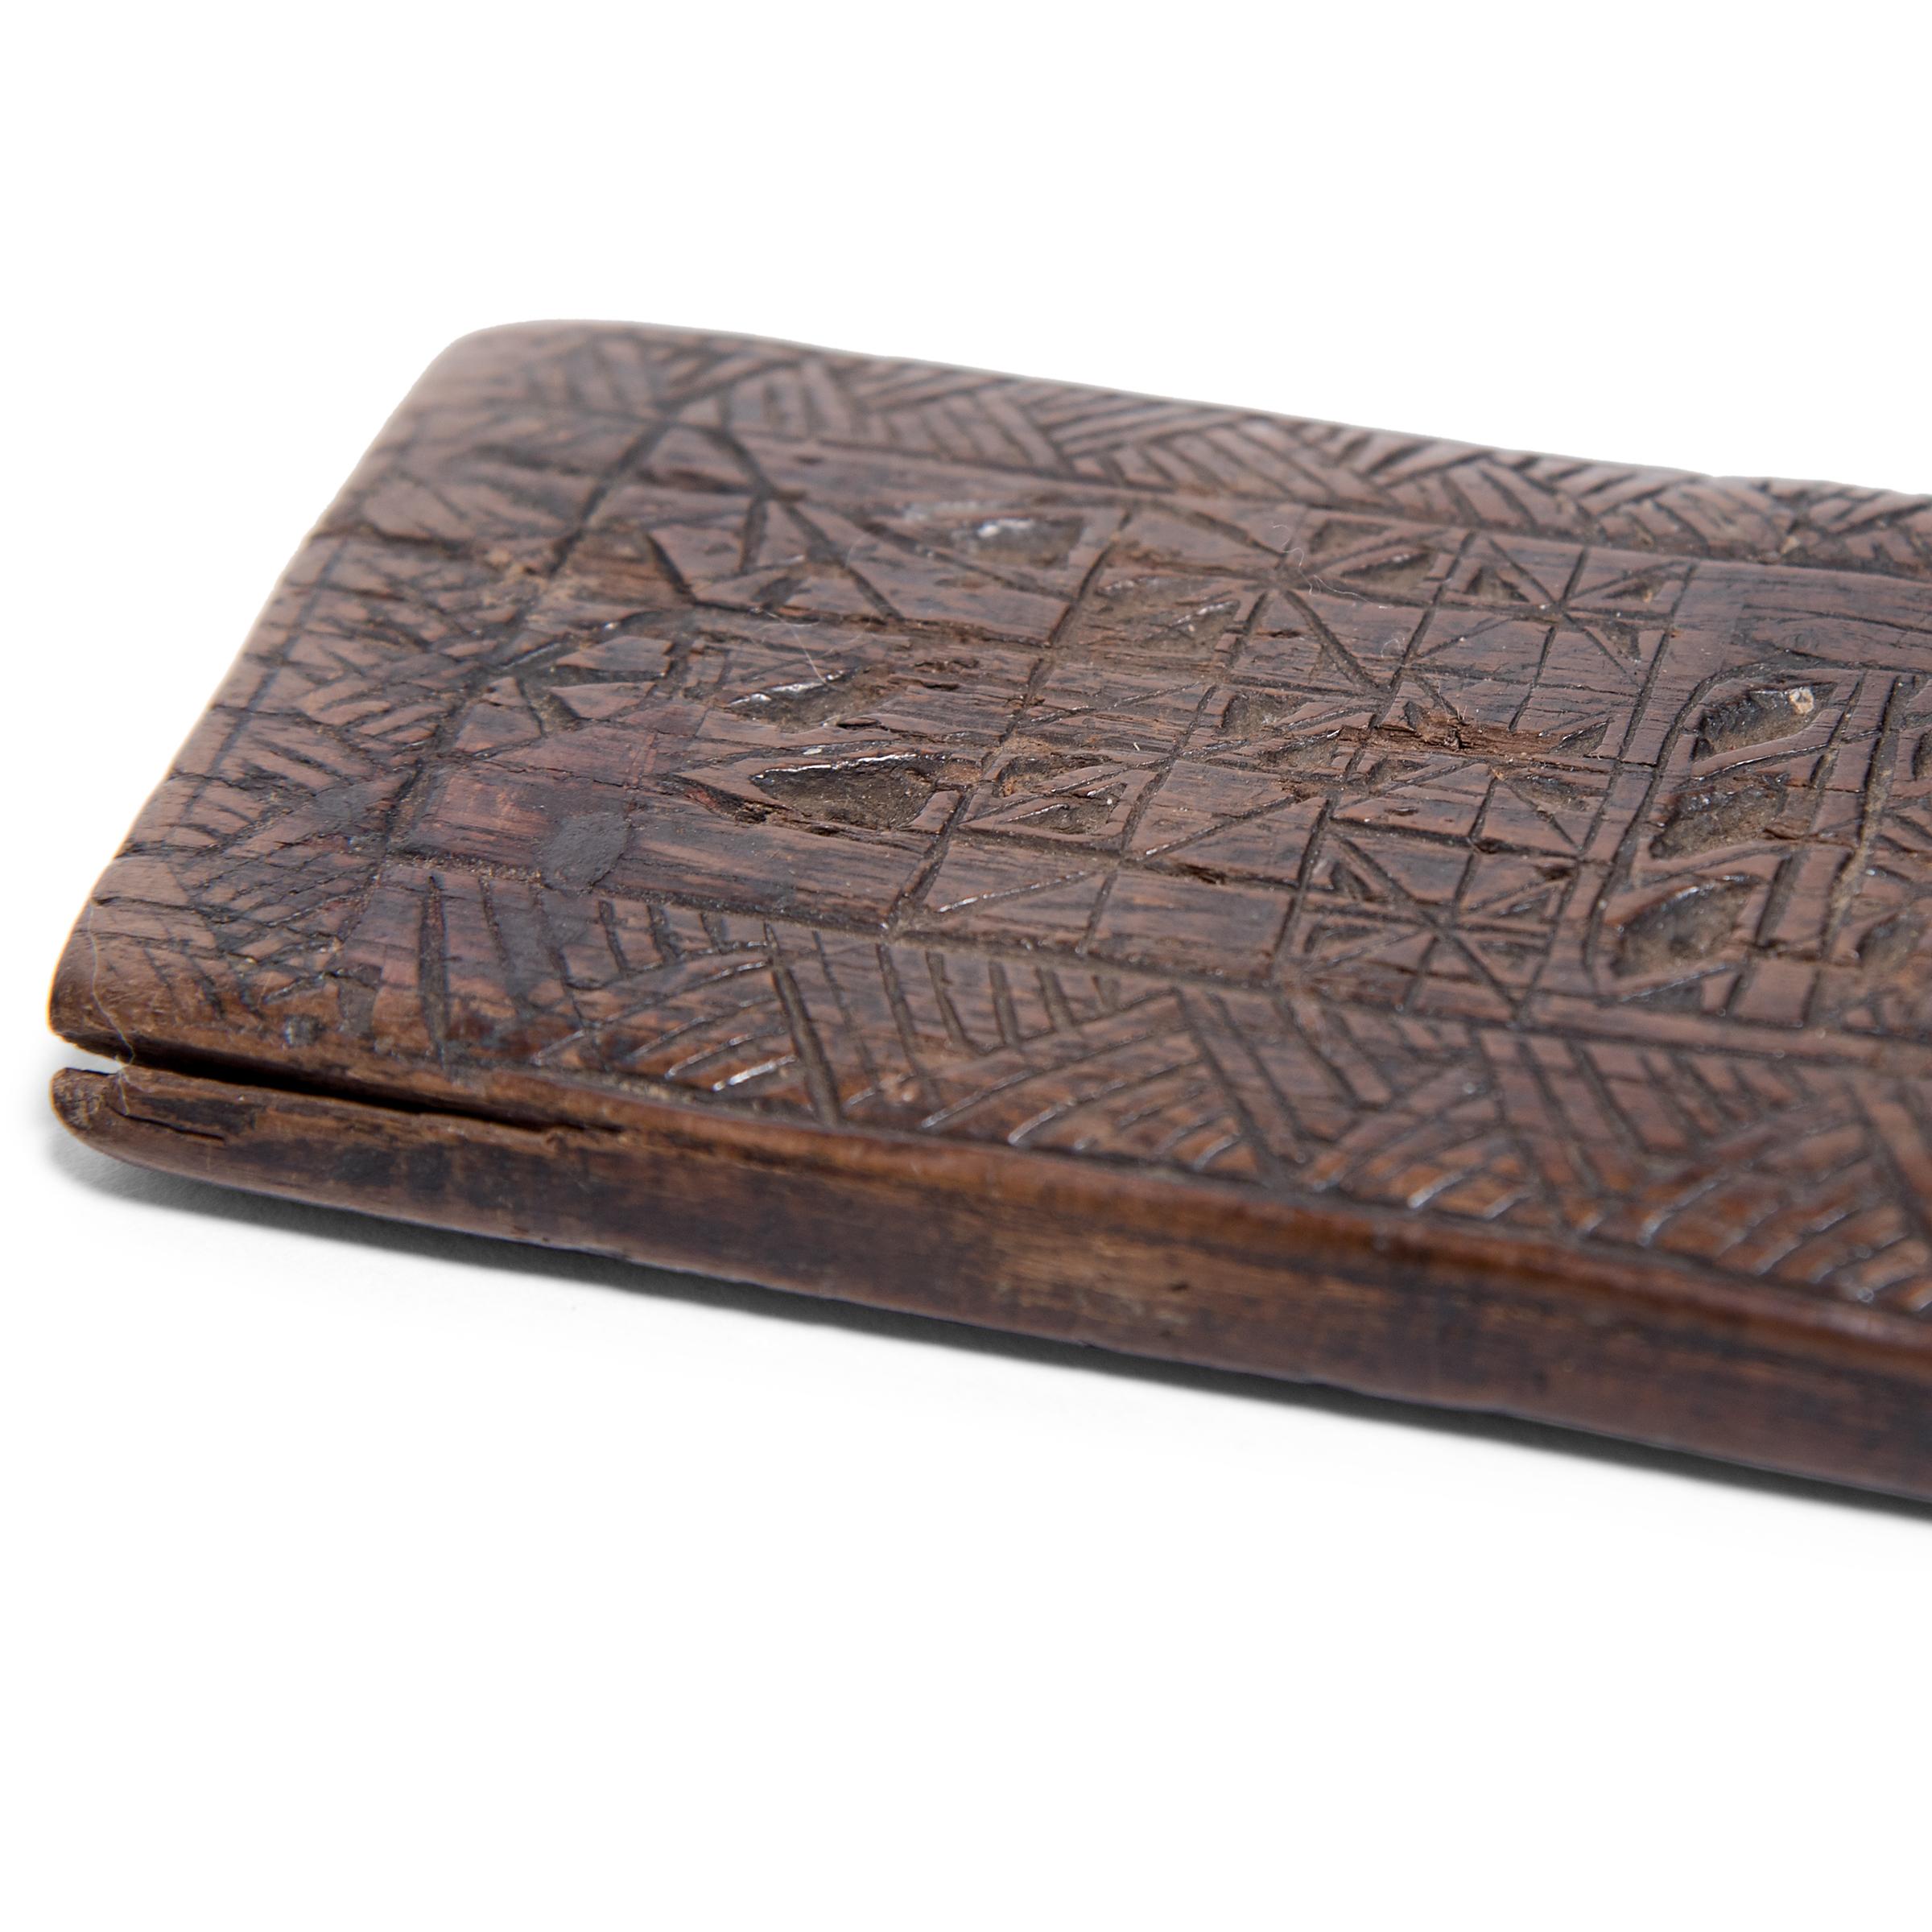 Dated to the 19th century, this flat wooden panel is curiously etched with geometric patterns, simple leaf motifs, and a triangle-work border. Its original use remains unknown - perhaps it was a divination tool, a traveling game board, or a weight